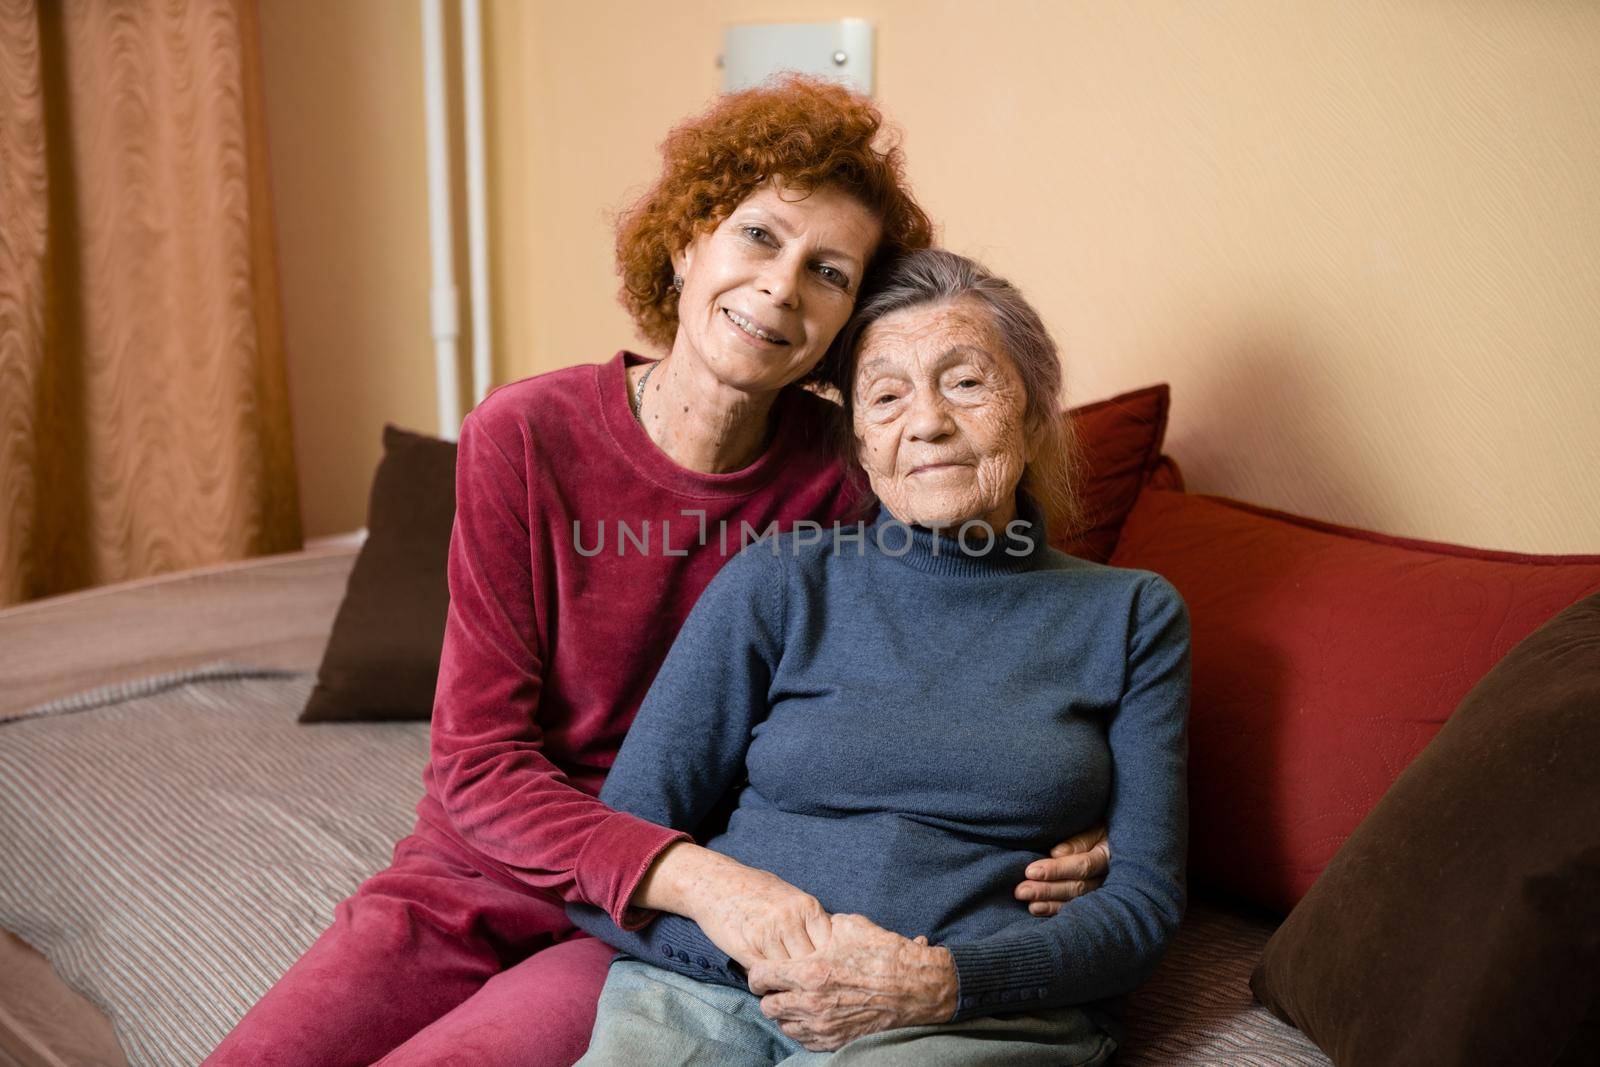 Elderly old cute woman with Alzheimer's very happy and smiling when eldest daughter hugs and takes care of her, at home on sofa. Theme aging and parenting, family relationships and social care oldest by Tomashevska